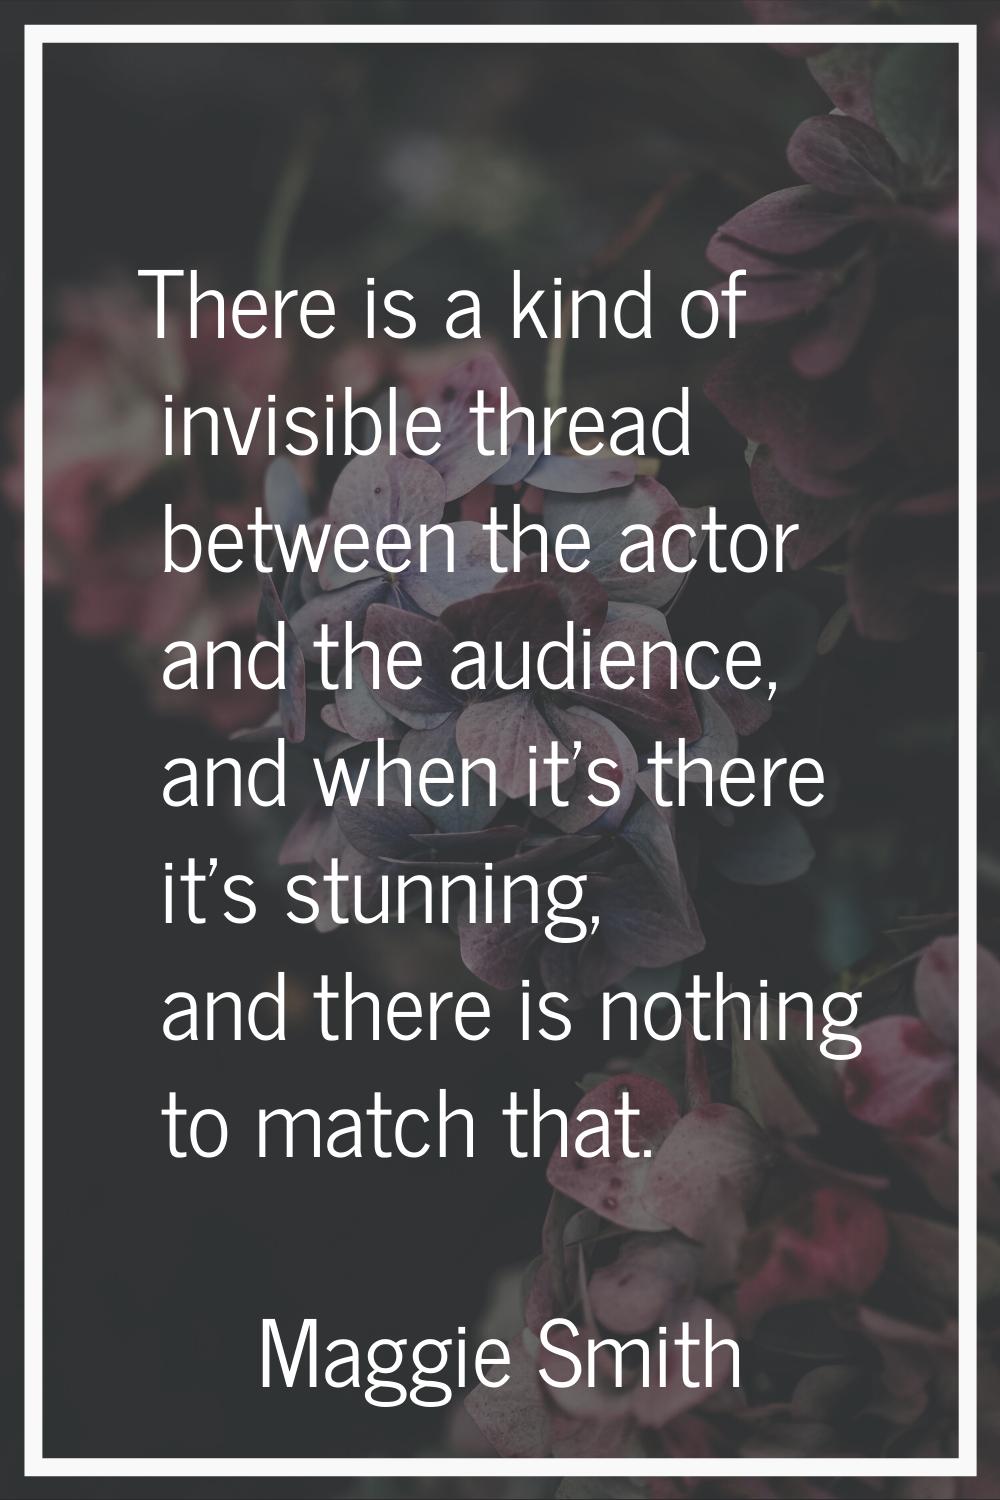 There is a kind of invisible thread between the actor and the audience, and when it's there it's st